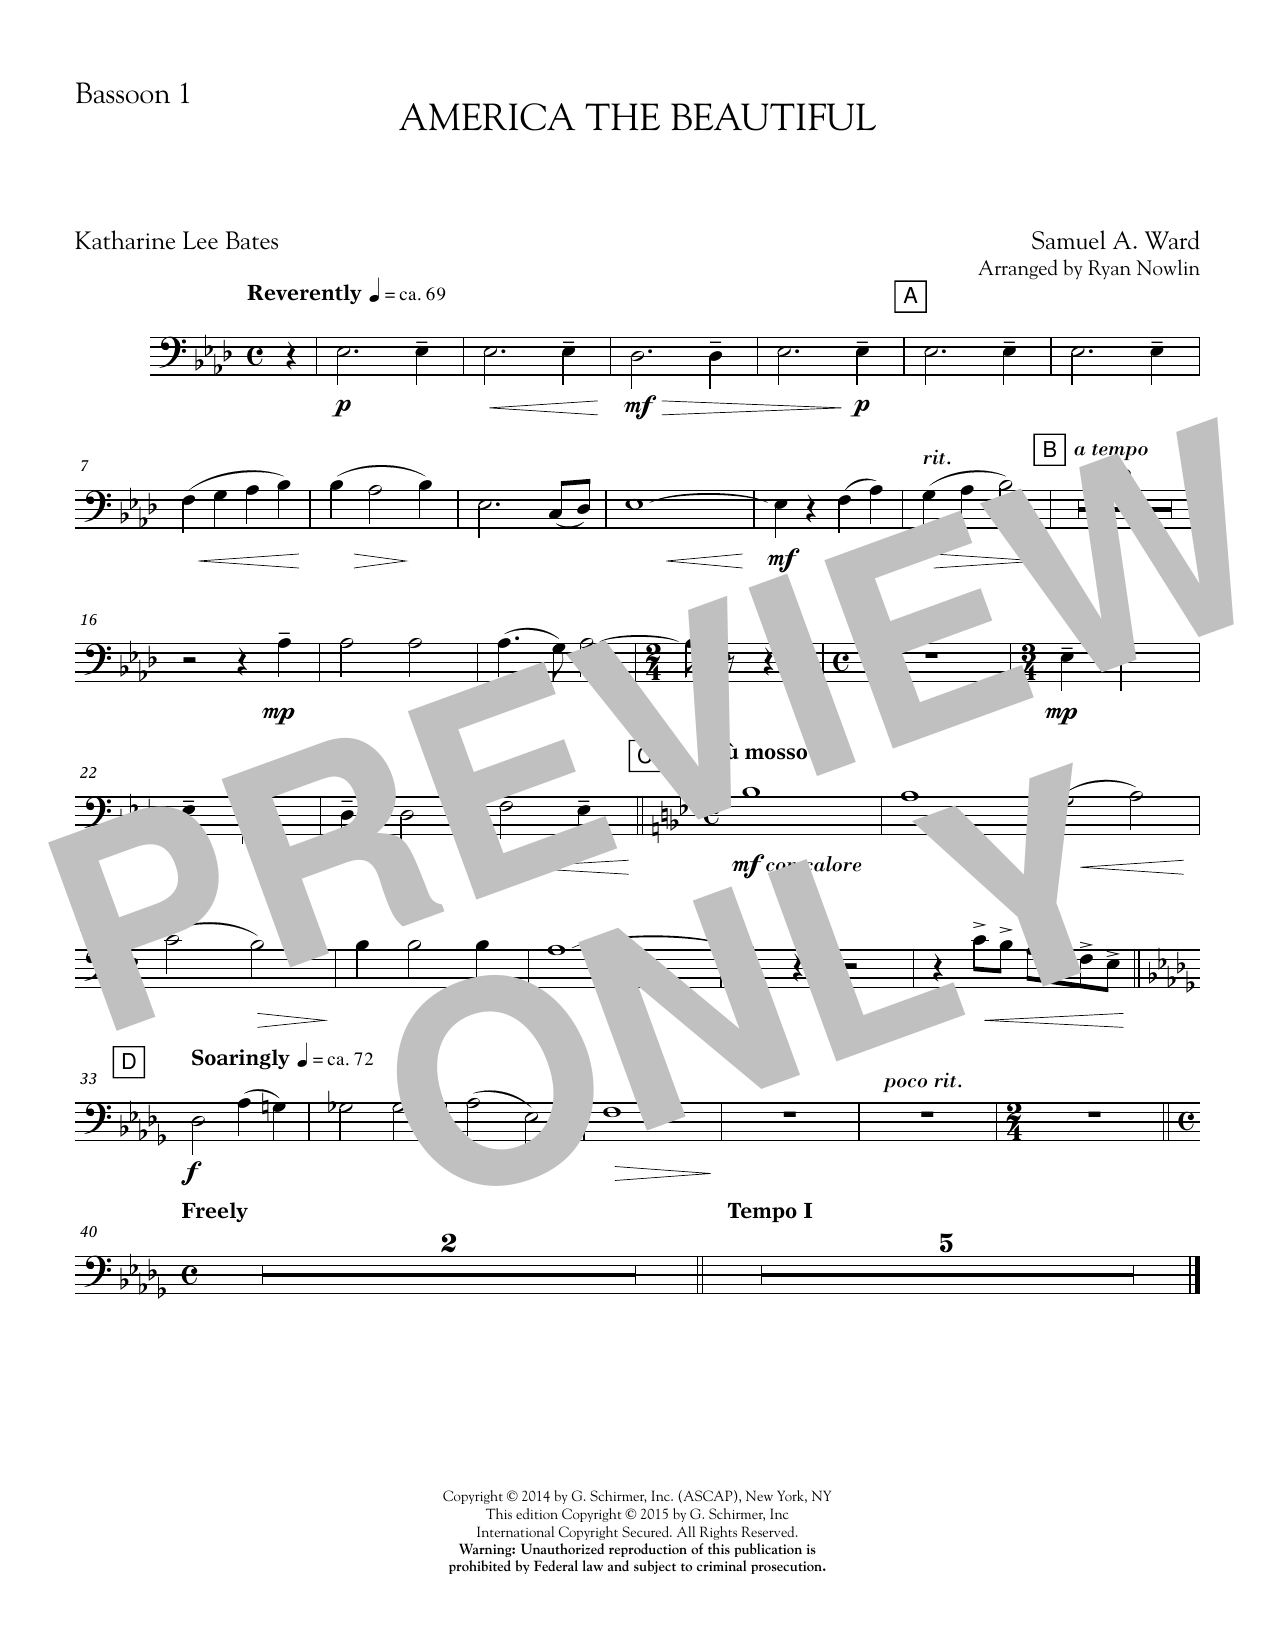 Ryan Nowlin America, the Beautiful - Bassoon 1 sheet music notes and chords. Download Printable PDF.